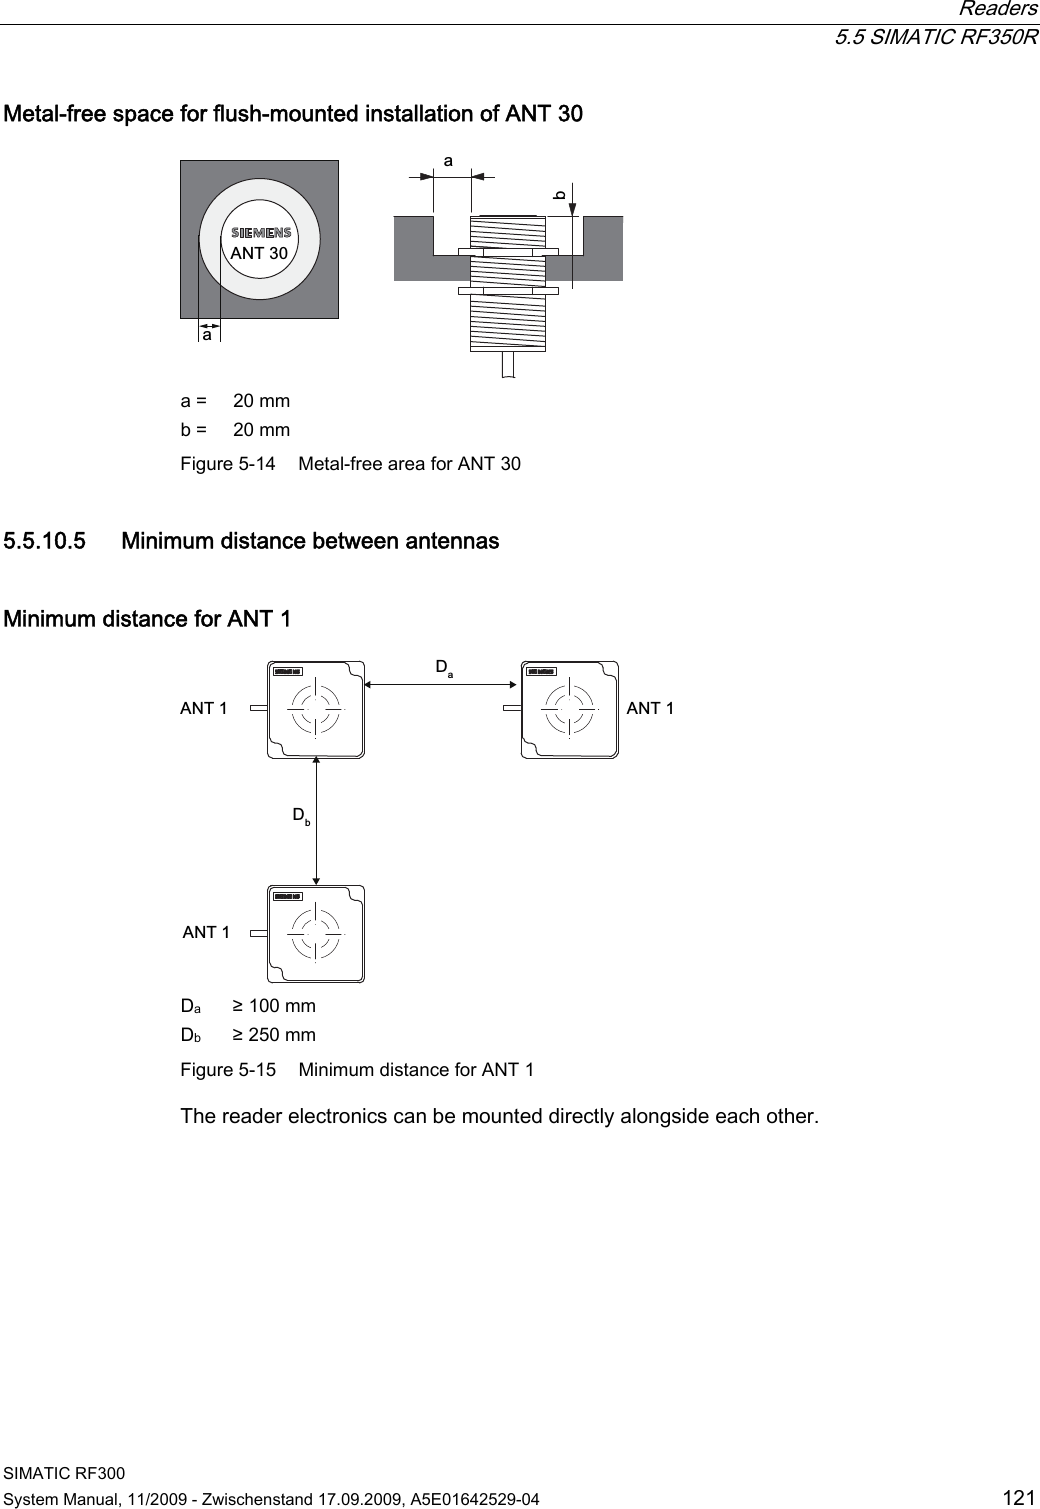  Readers  5.5 SIMATIC RF350R SIMATIC RF300 System Manual, 11/2009 - Zwischenstand 17.09.2009, A5E01642529-04  121 Metal-free space for flush-mounted installation of ANT 30 EDD$17 a =  20 mm b =  20 mm Figure 5-14  Metal-free area for ANT 30 5.5.10.5 Minimum distance between antennas Minimum distance for ANT 1  $17$17$17&apos;D&apos;E Da  ≥ 100 mm Db  ≥ 250 mm Figure 5-15  Minimum distance for ANT 1 The reader electronics can be mounted directly alongside each other. 